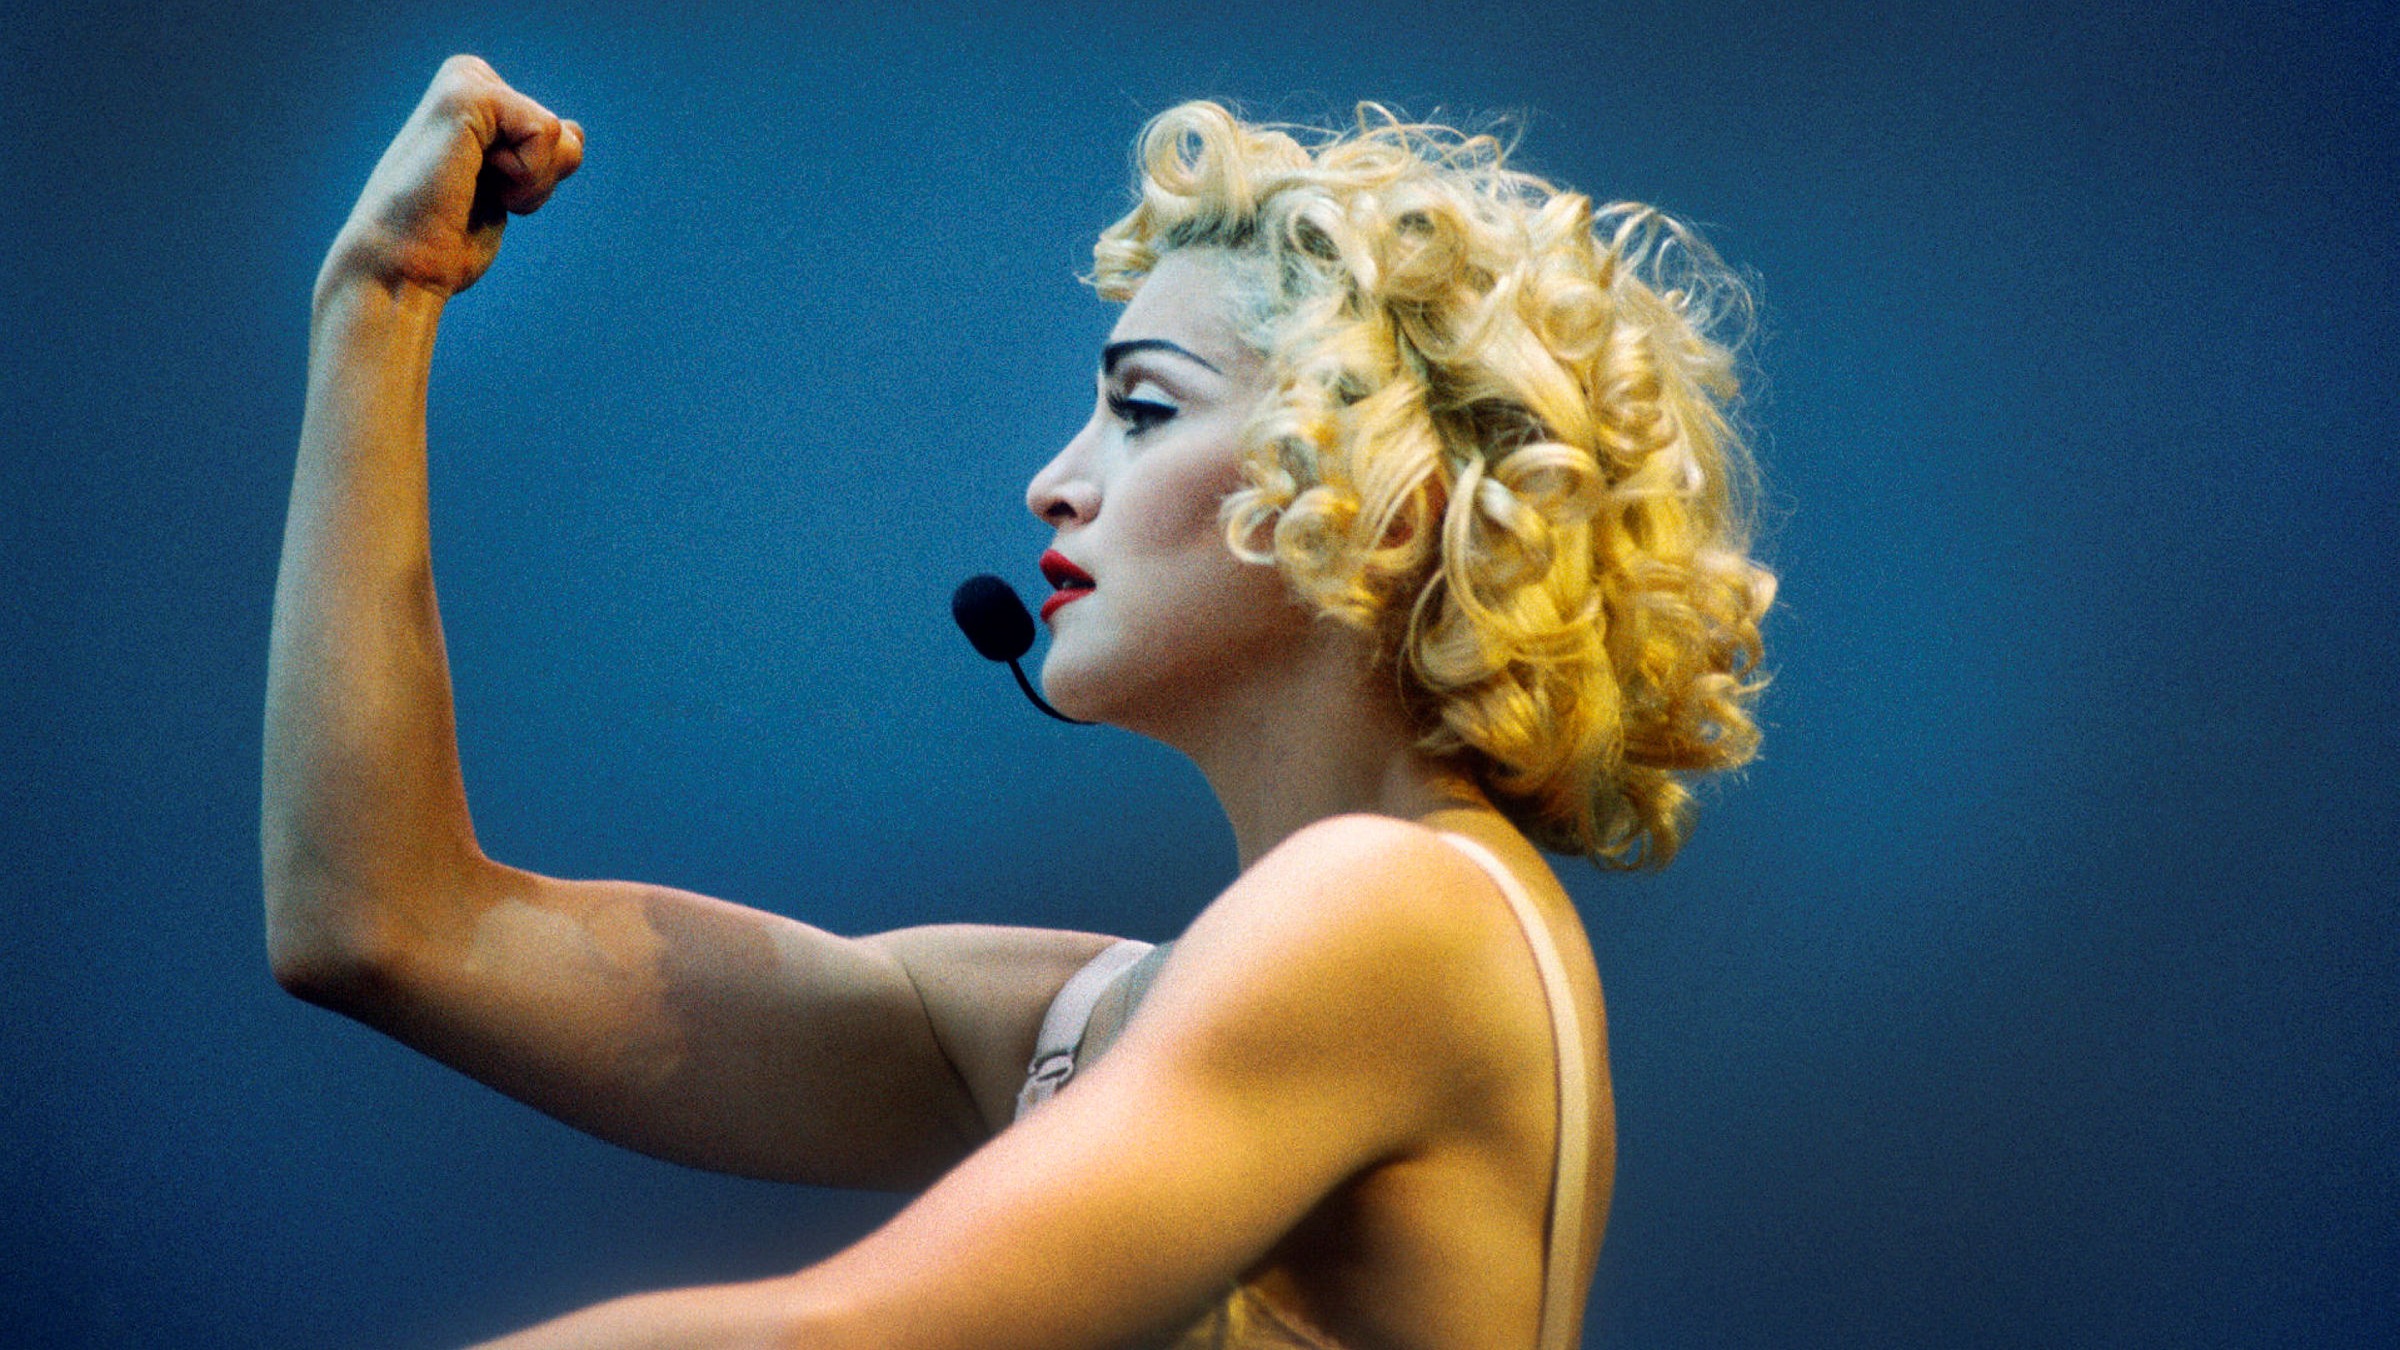 She can't be stopped!' — 40 years of Madonna | Financial Times